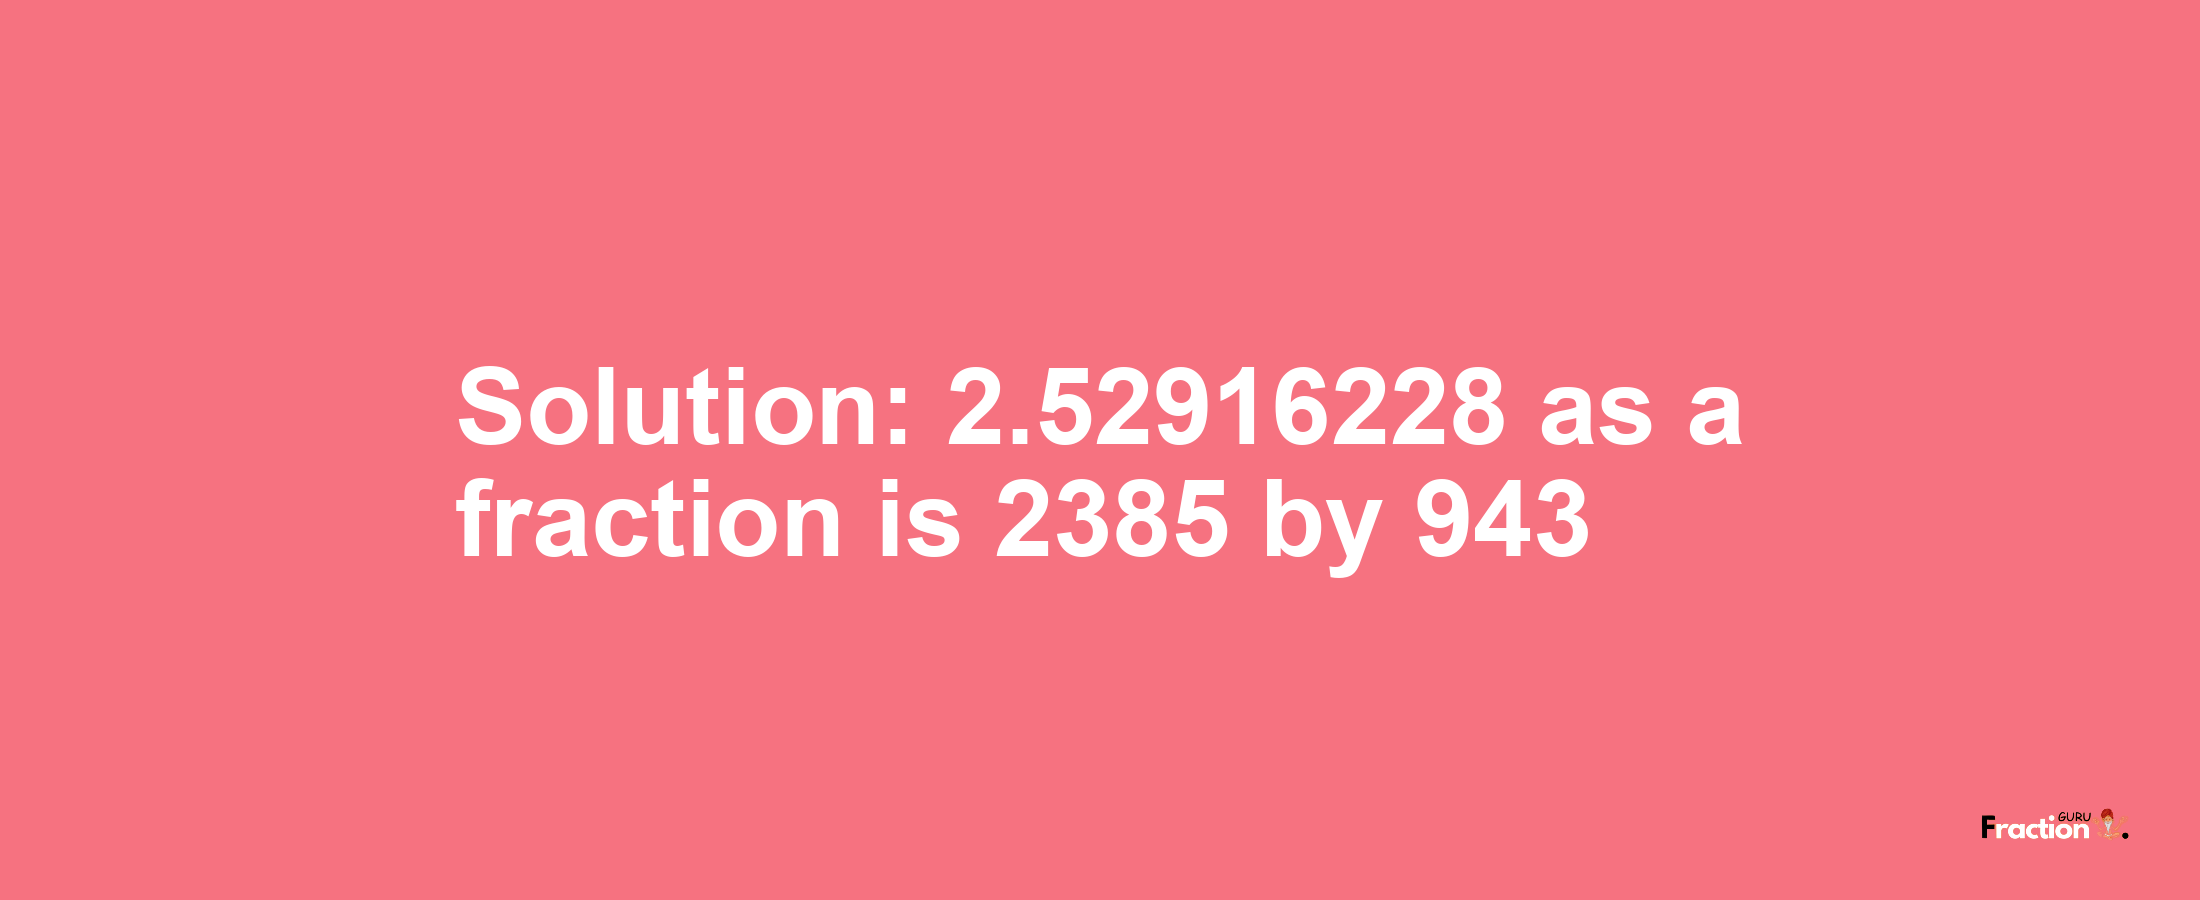 Solution:2.52916228 as a fraction is 2385/943